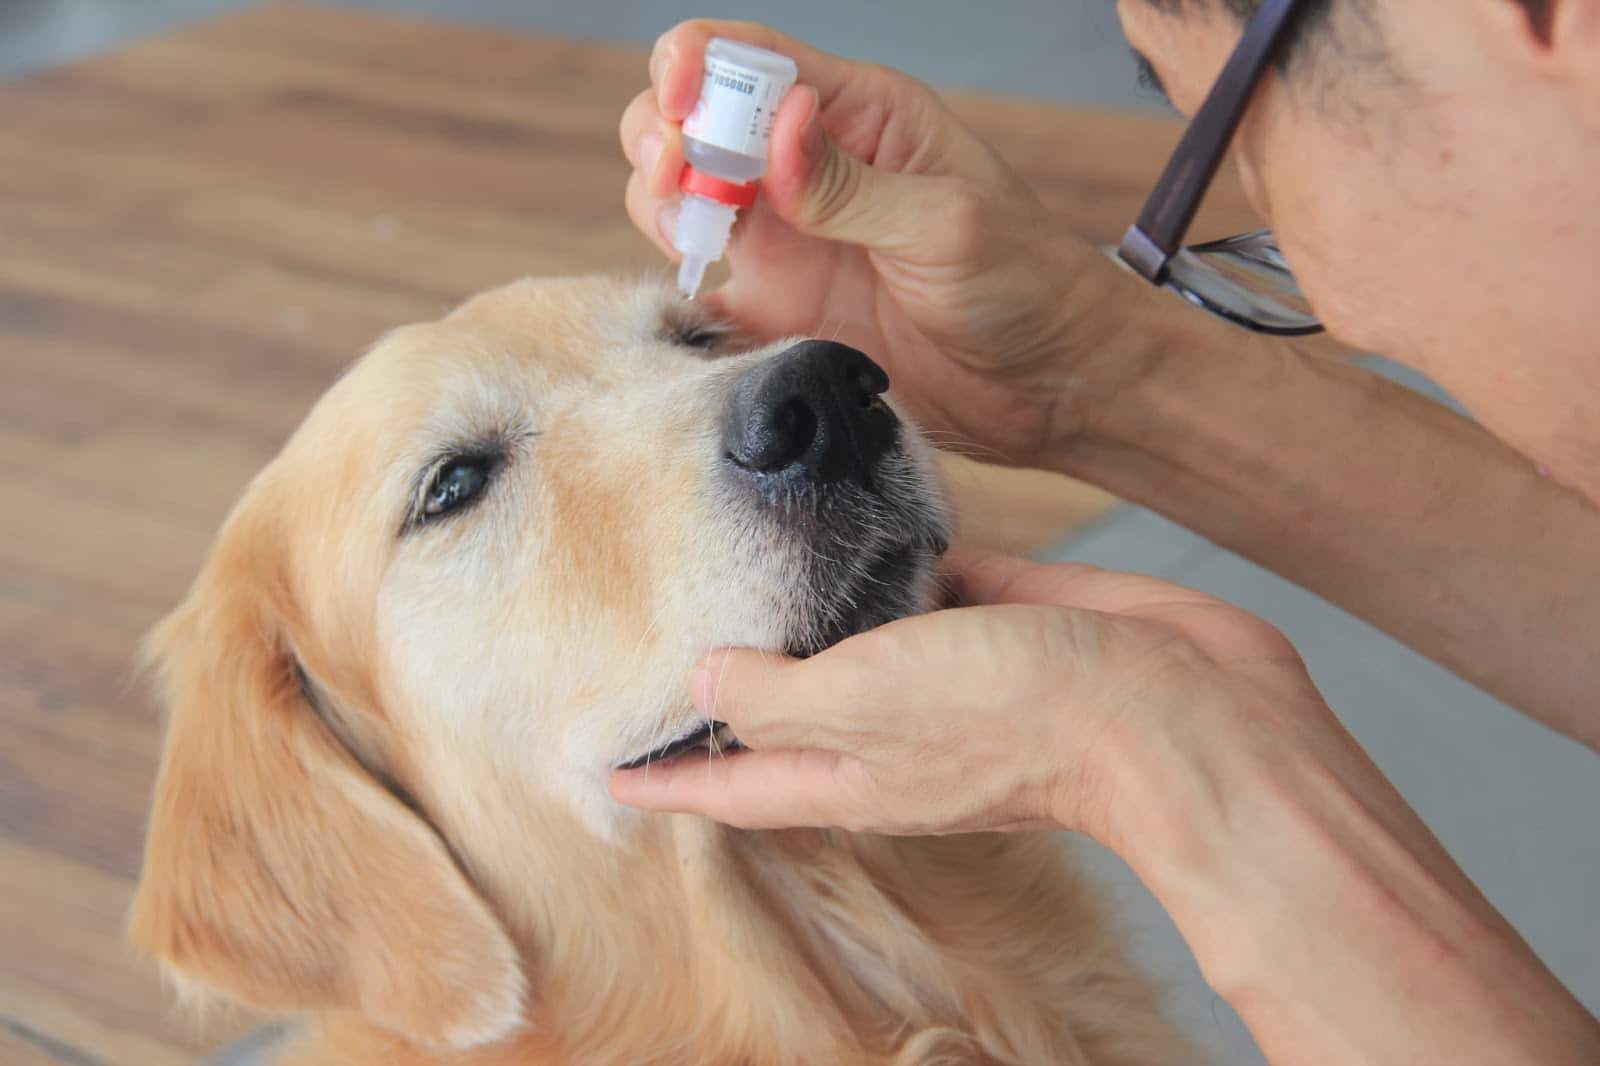 How To Safely Rinse A Dog’s Eye